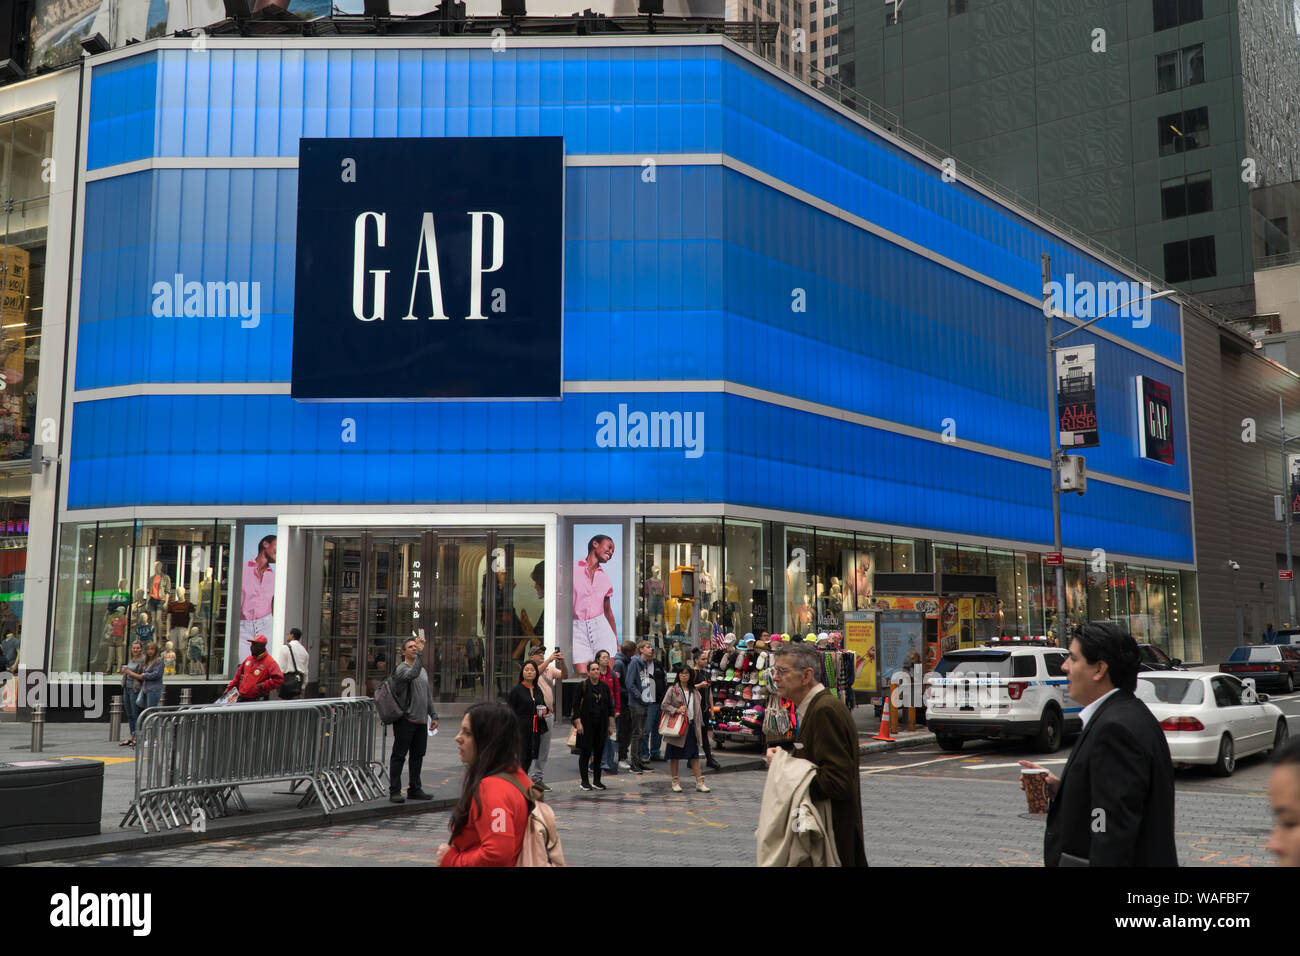 New York City, Circa 2019: GAP inc retail flagship store in Times Square manhattan. Day time exterior fashion clothing store neon sign facade Stock Photo